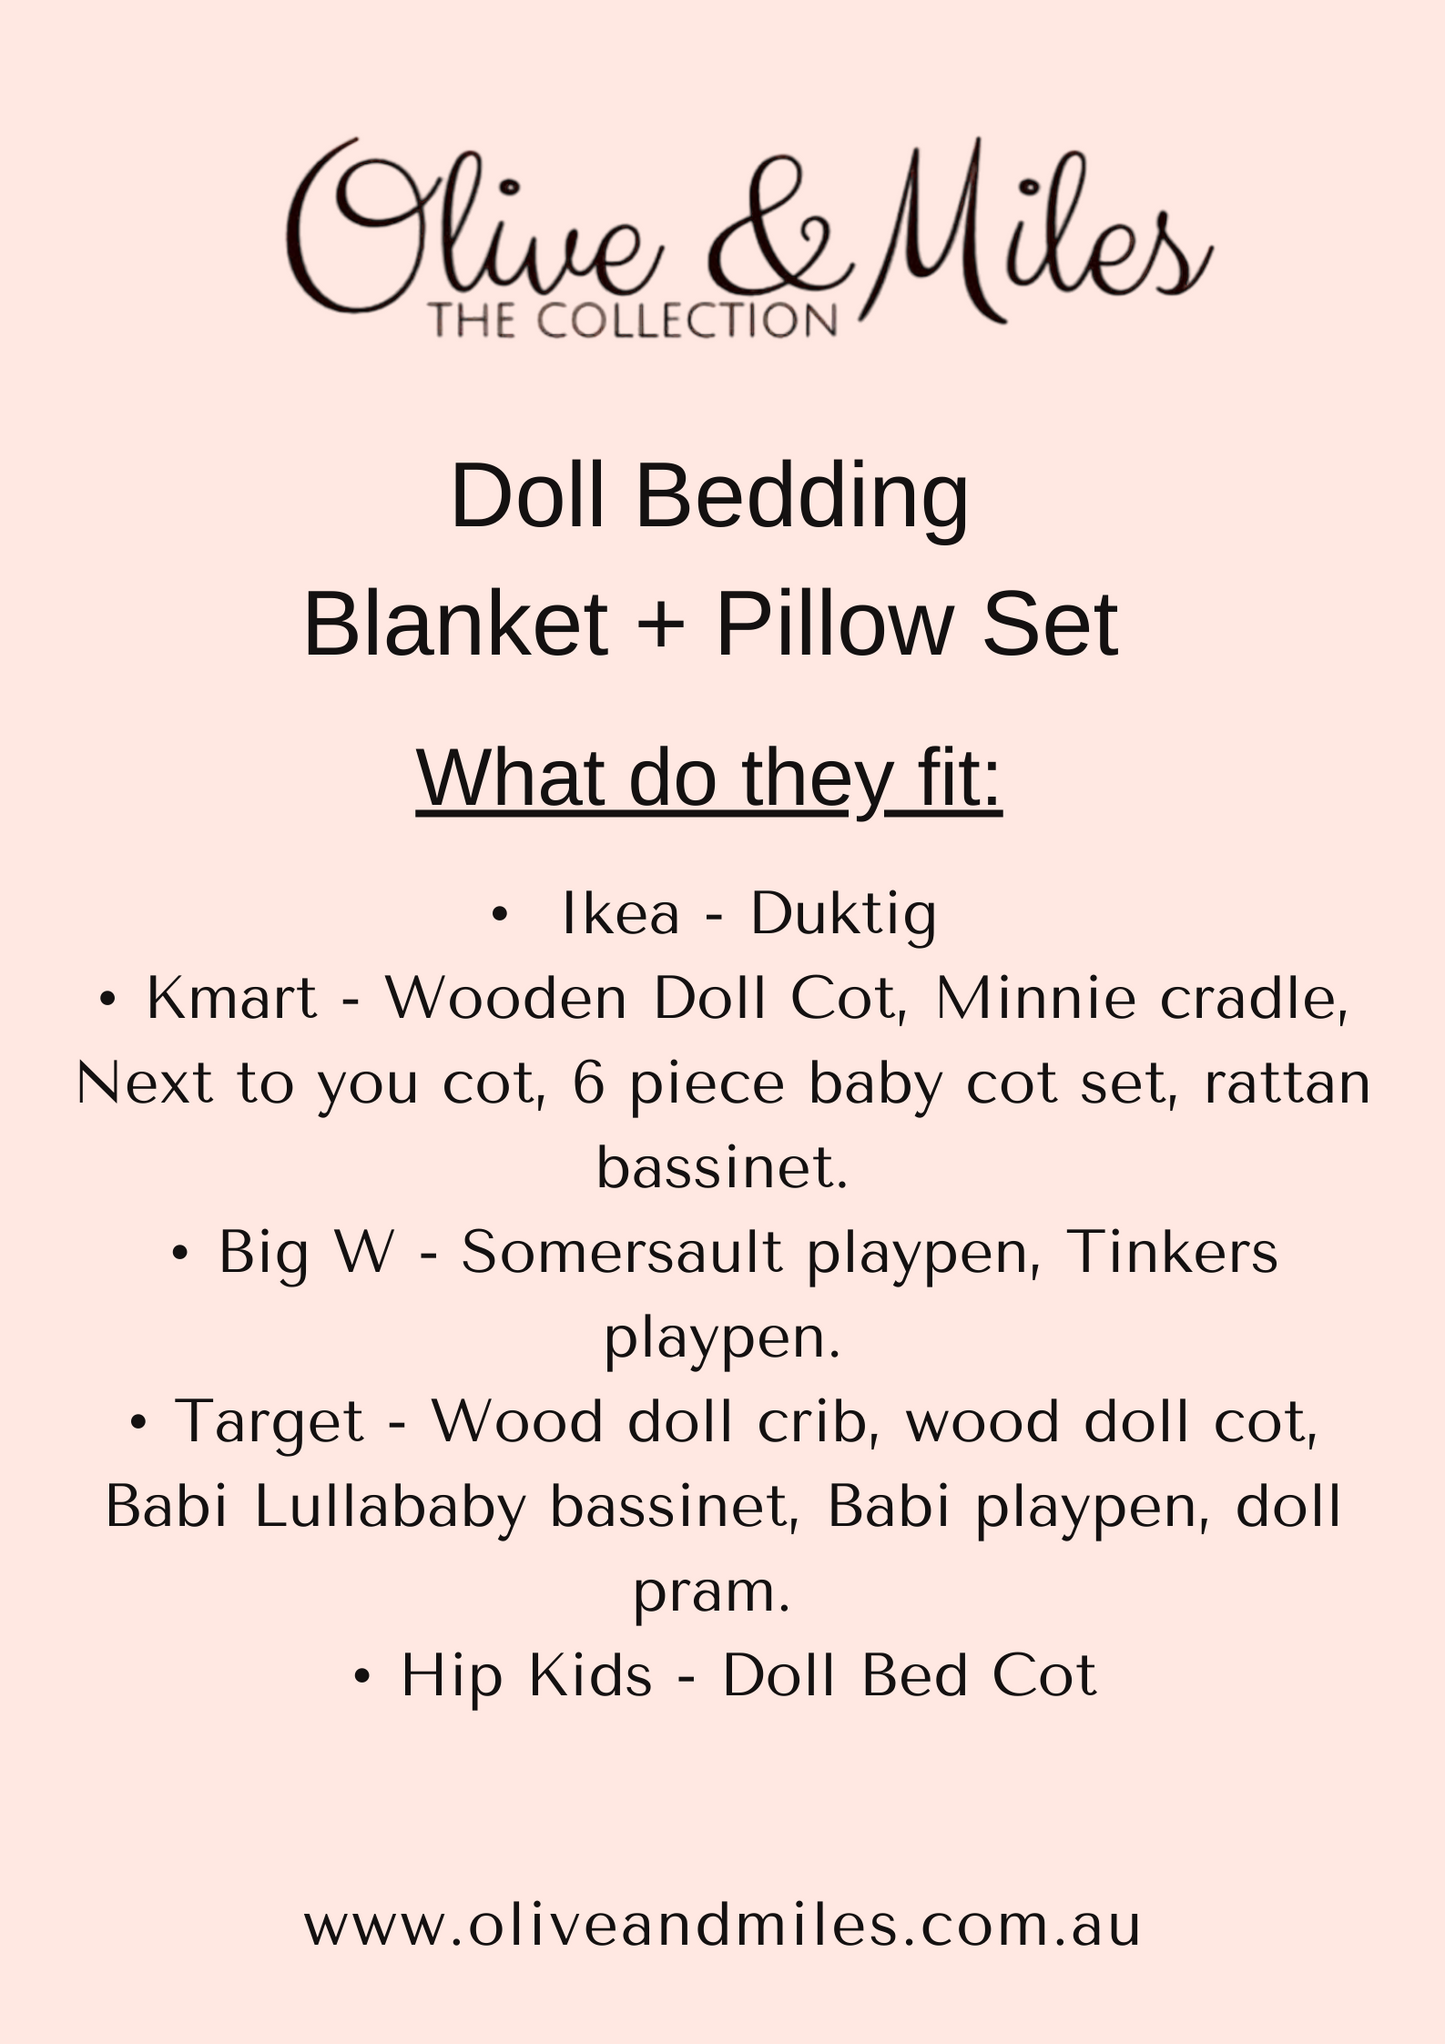 Cookies Doll Bedding